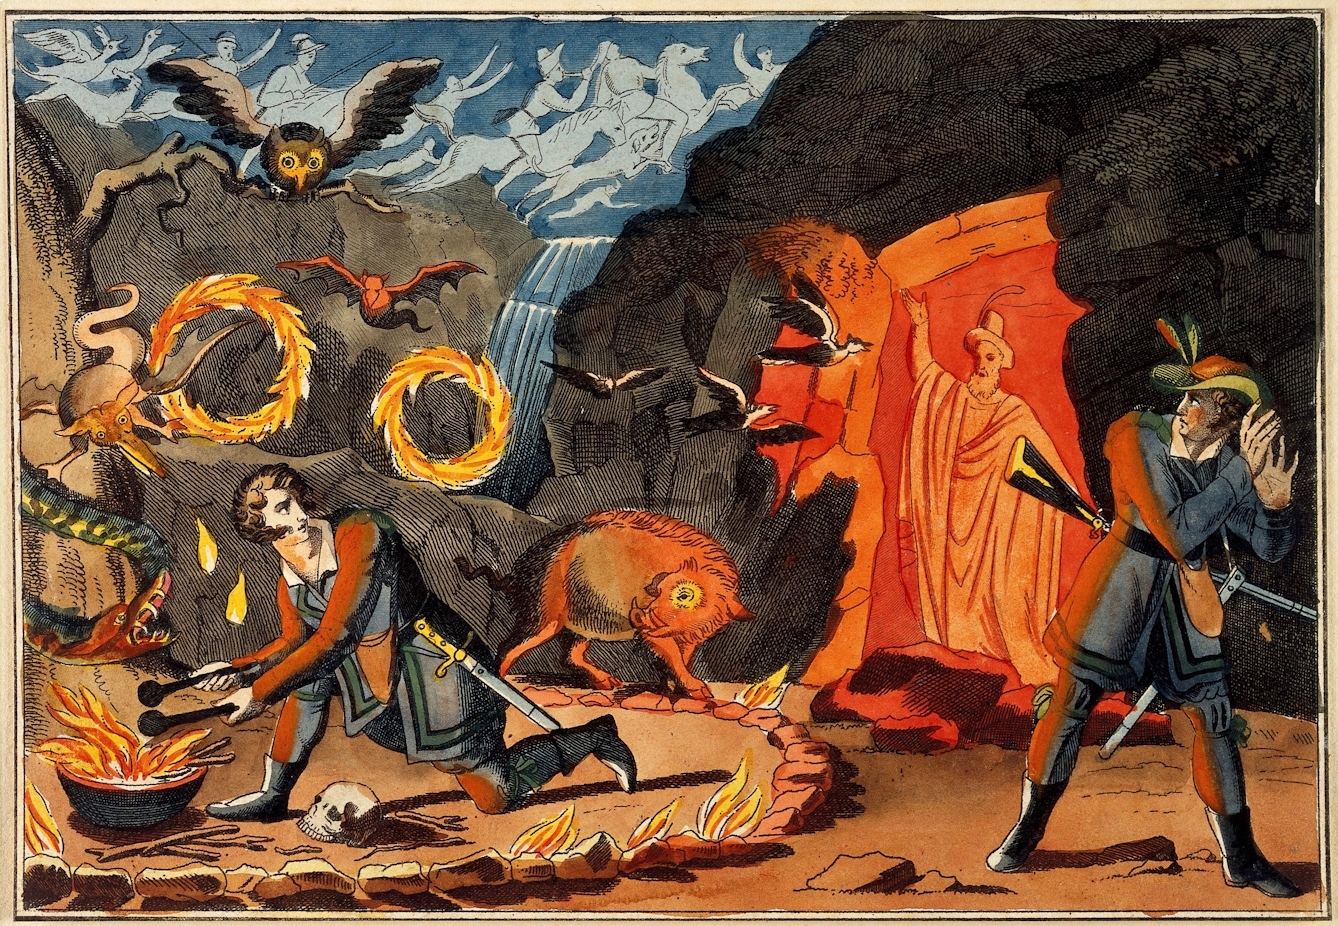 Coloured engraving showing a man conducting magic rites, devils and a ghost appearing, and a hunter cowering in terror. 